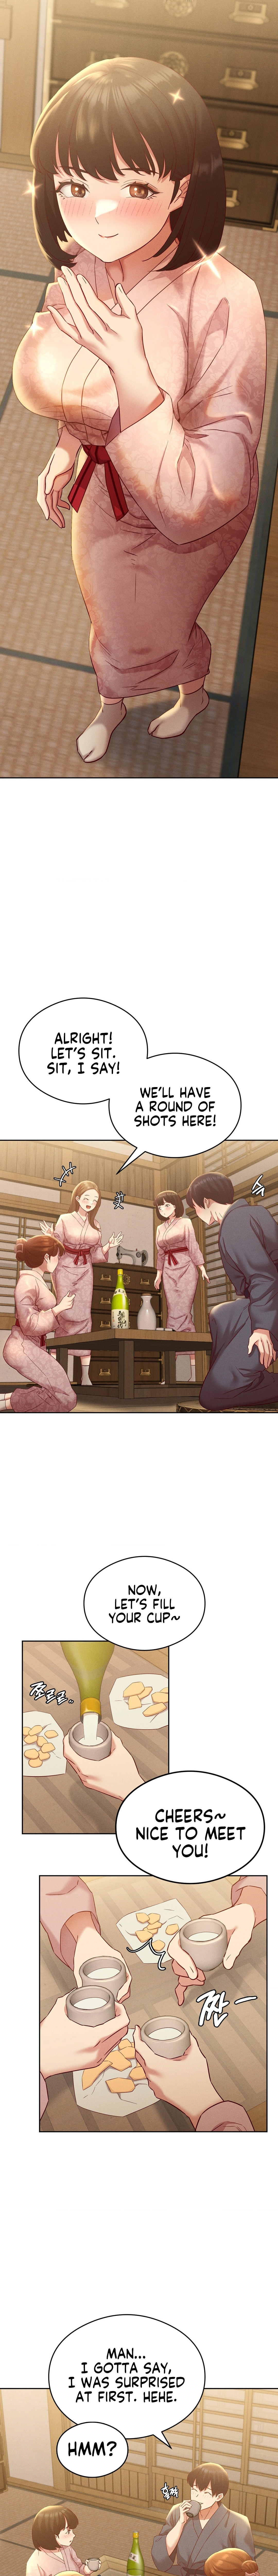 Shall We Go To The Ryokan Together? - Chapter 2 Page 9